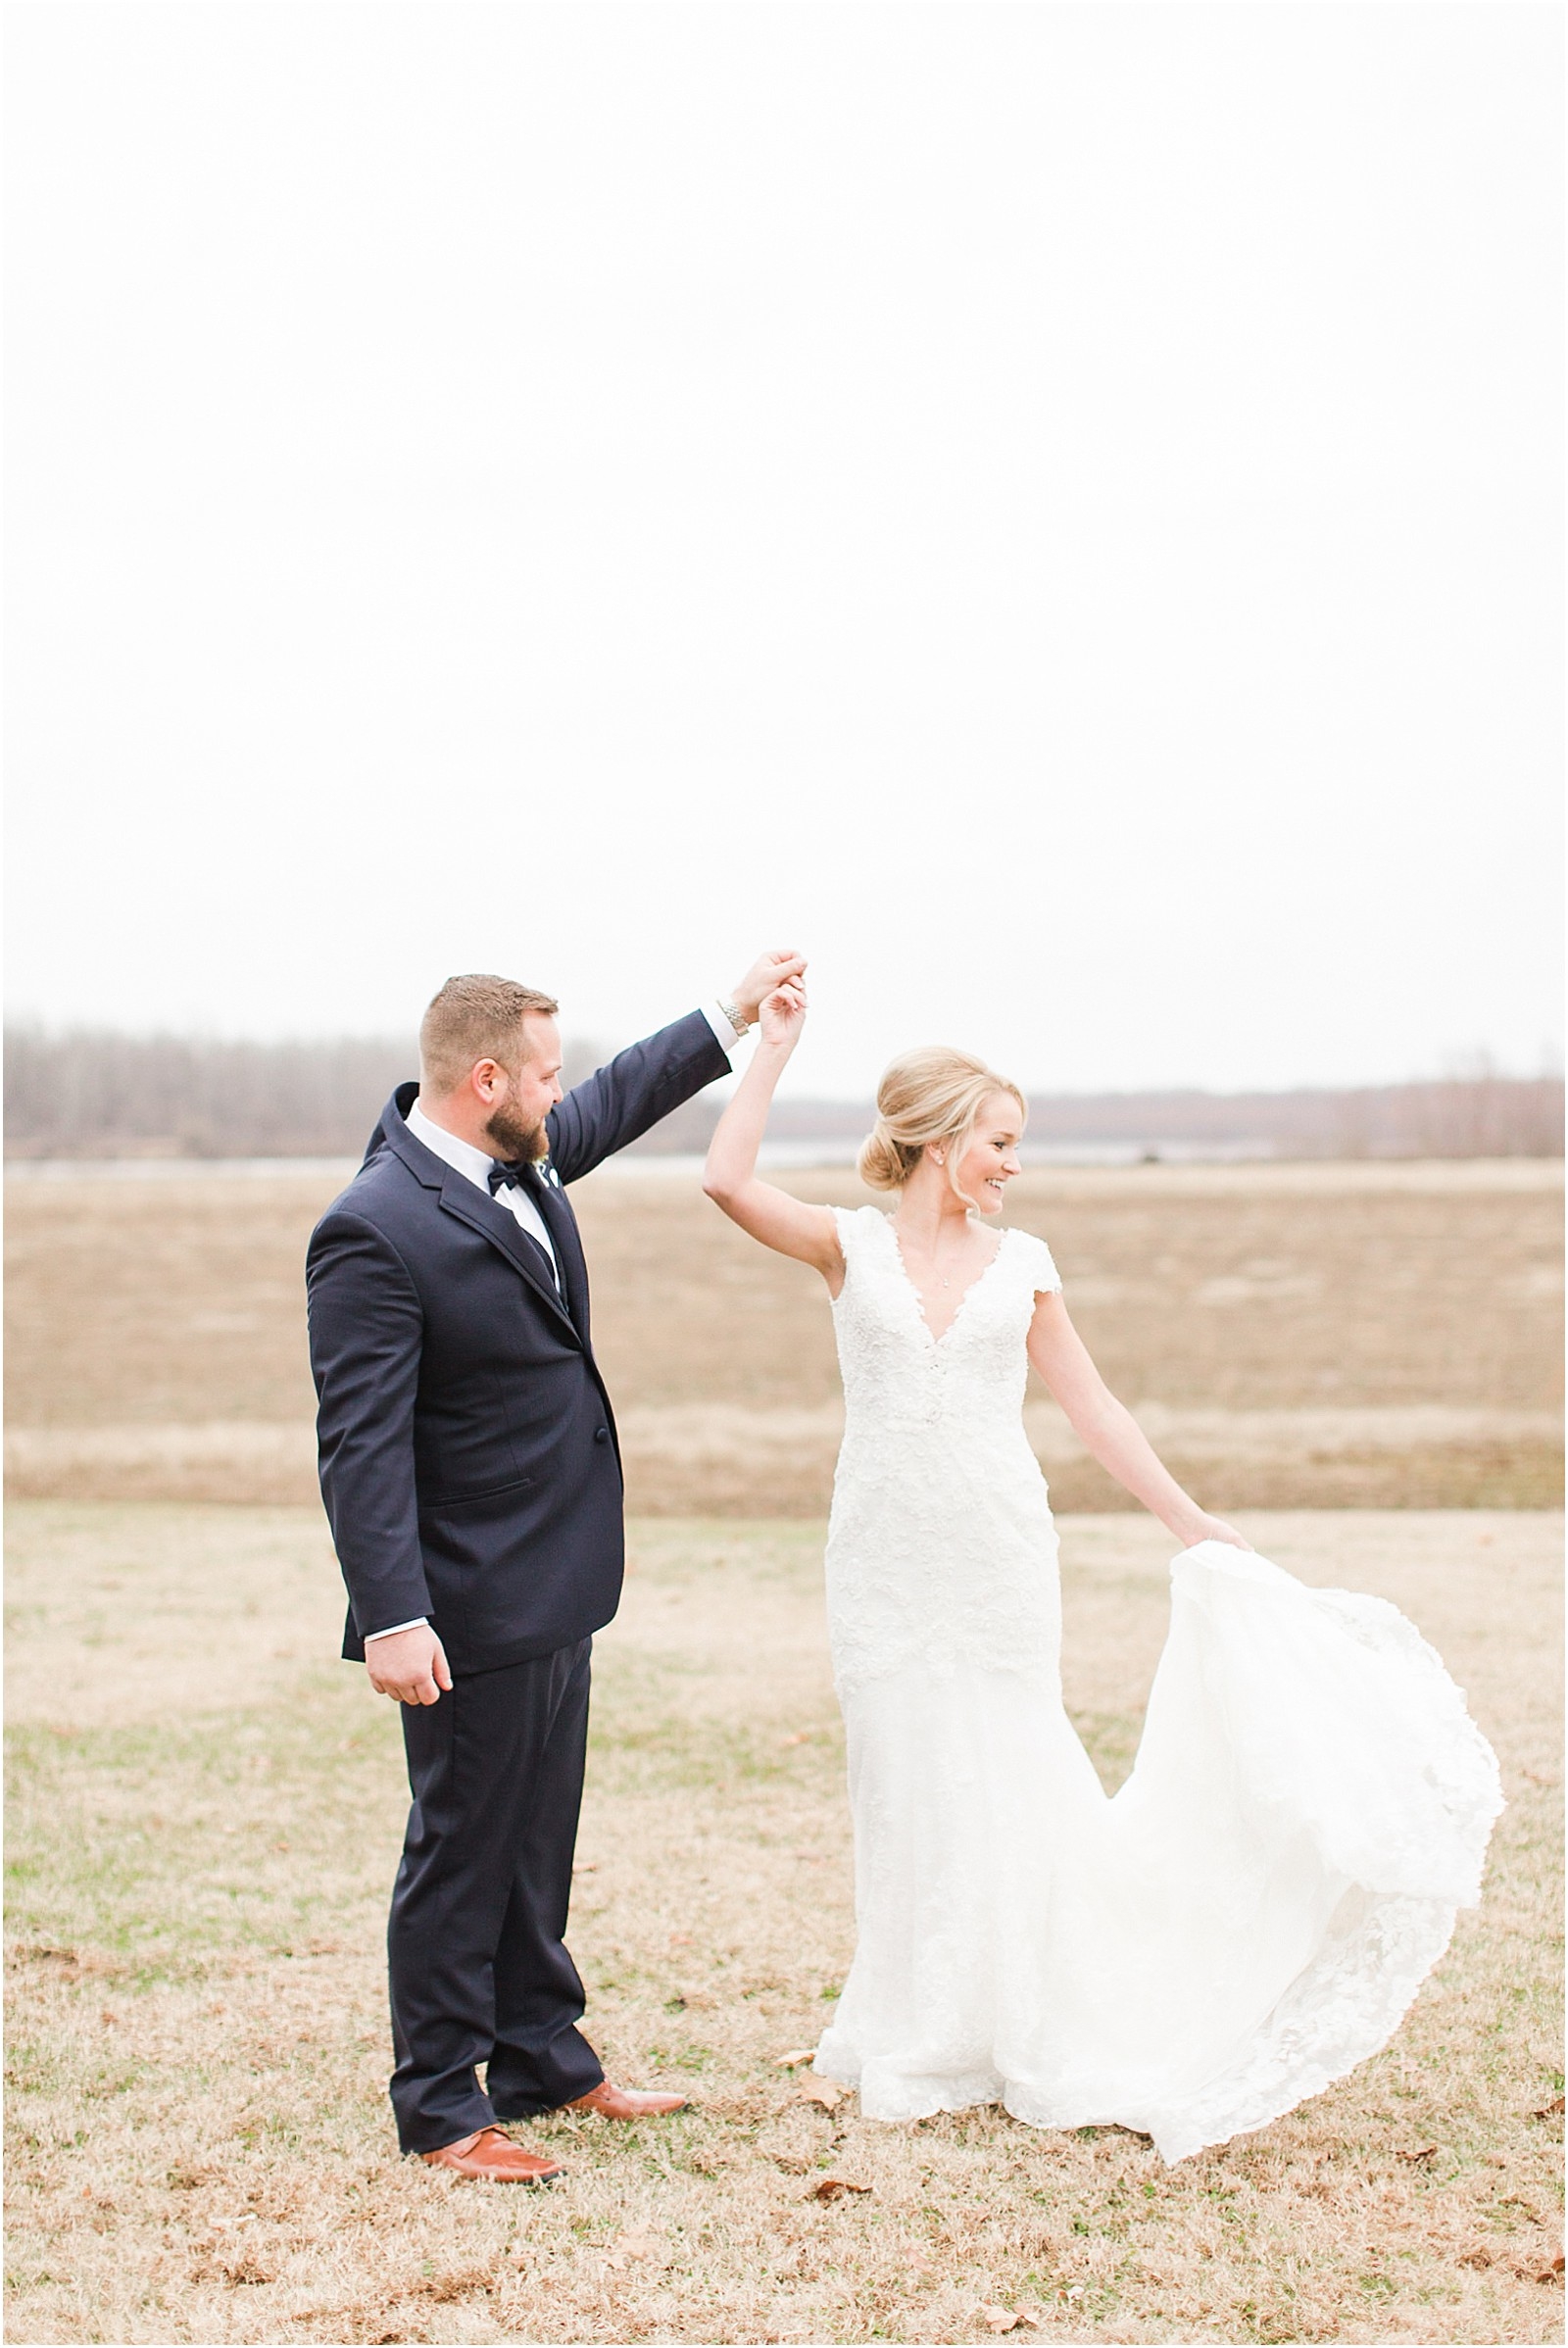 A Classic Winter Wedding in New Harmony | Rachel and Ryan | Bret and Brandie Photography 0101.jpg